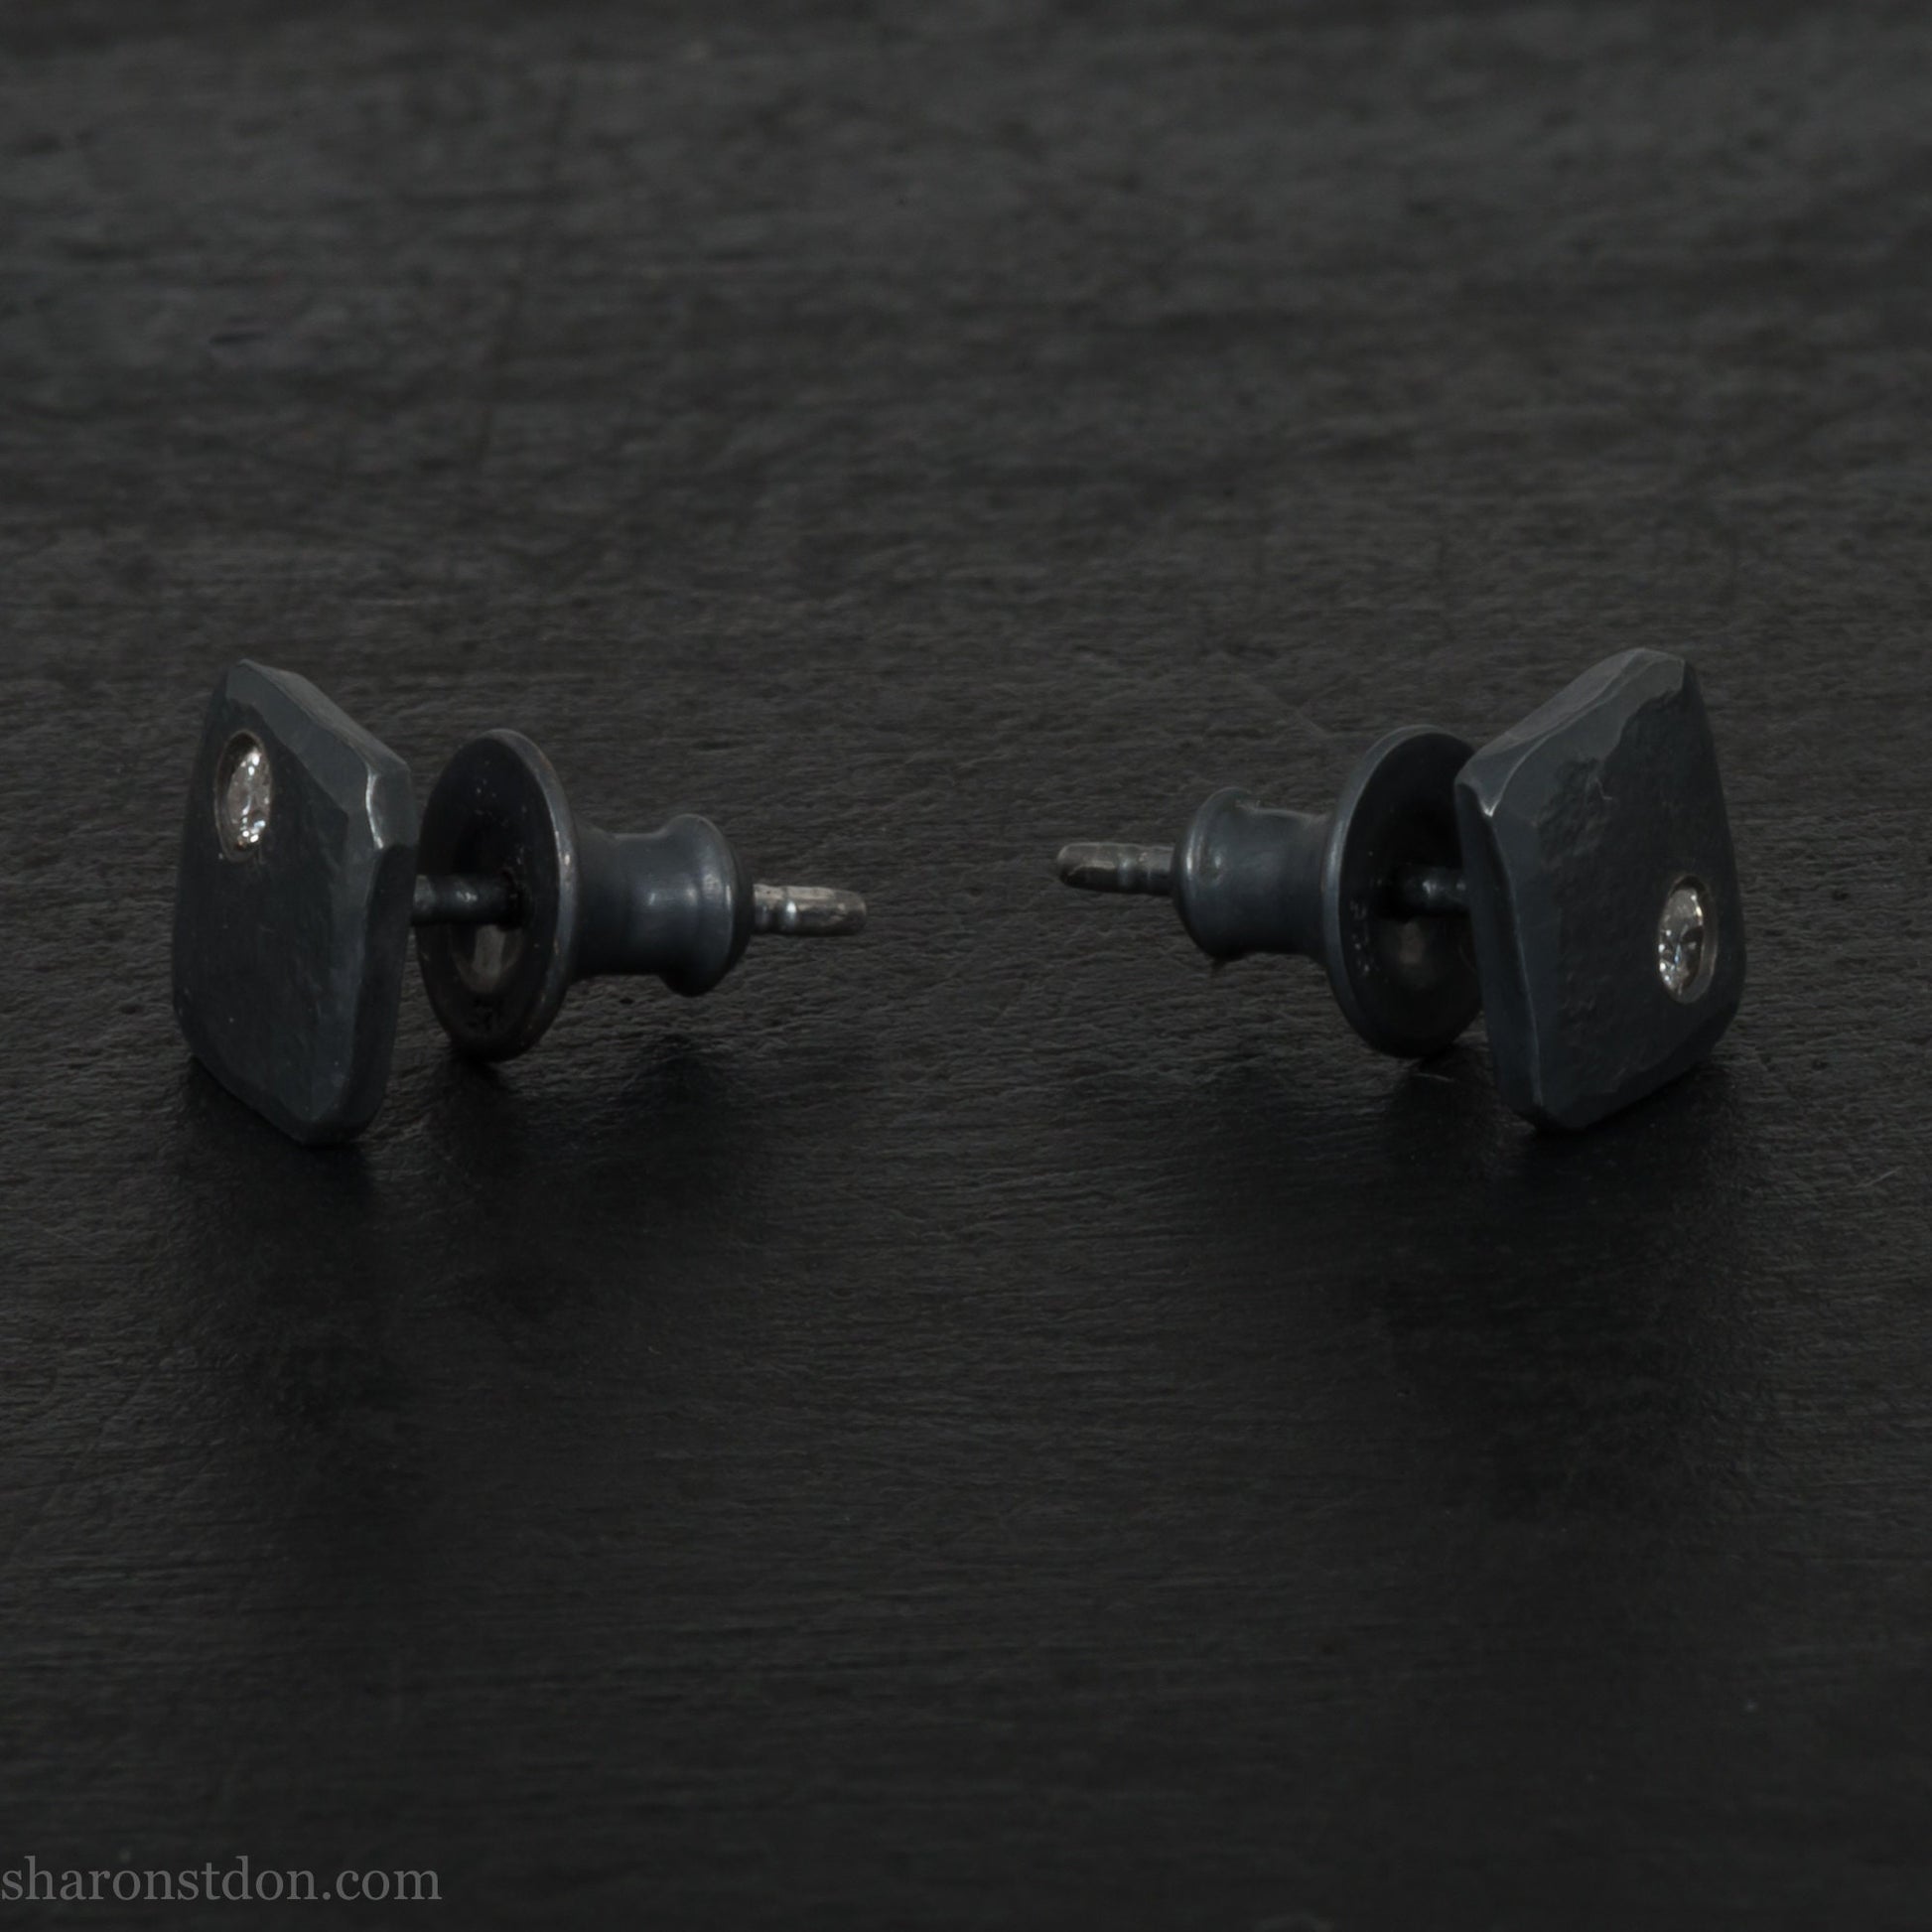 Canadian diamond 7mm square studs | Oxidized black 925 sterling silver stud earrings for men or women, non binary | Handmade, unique design